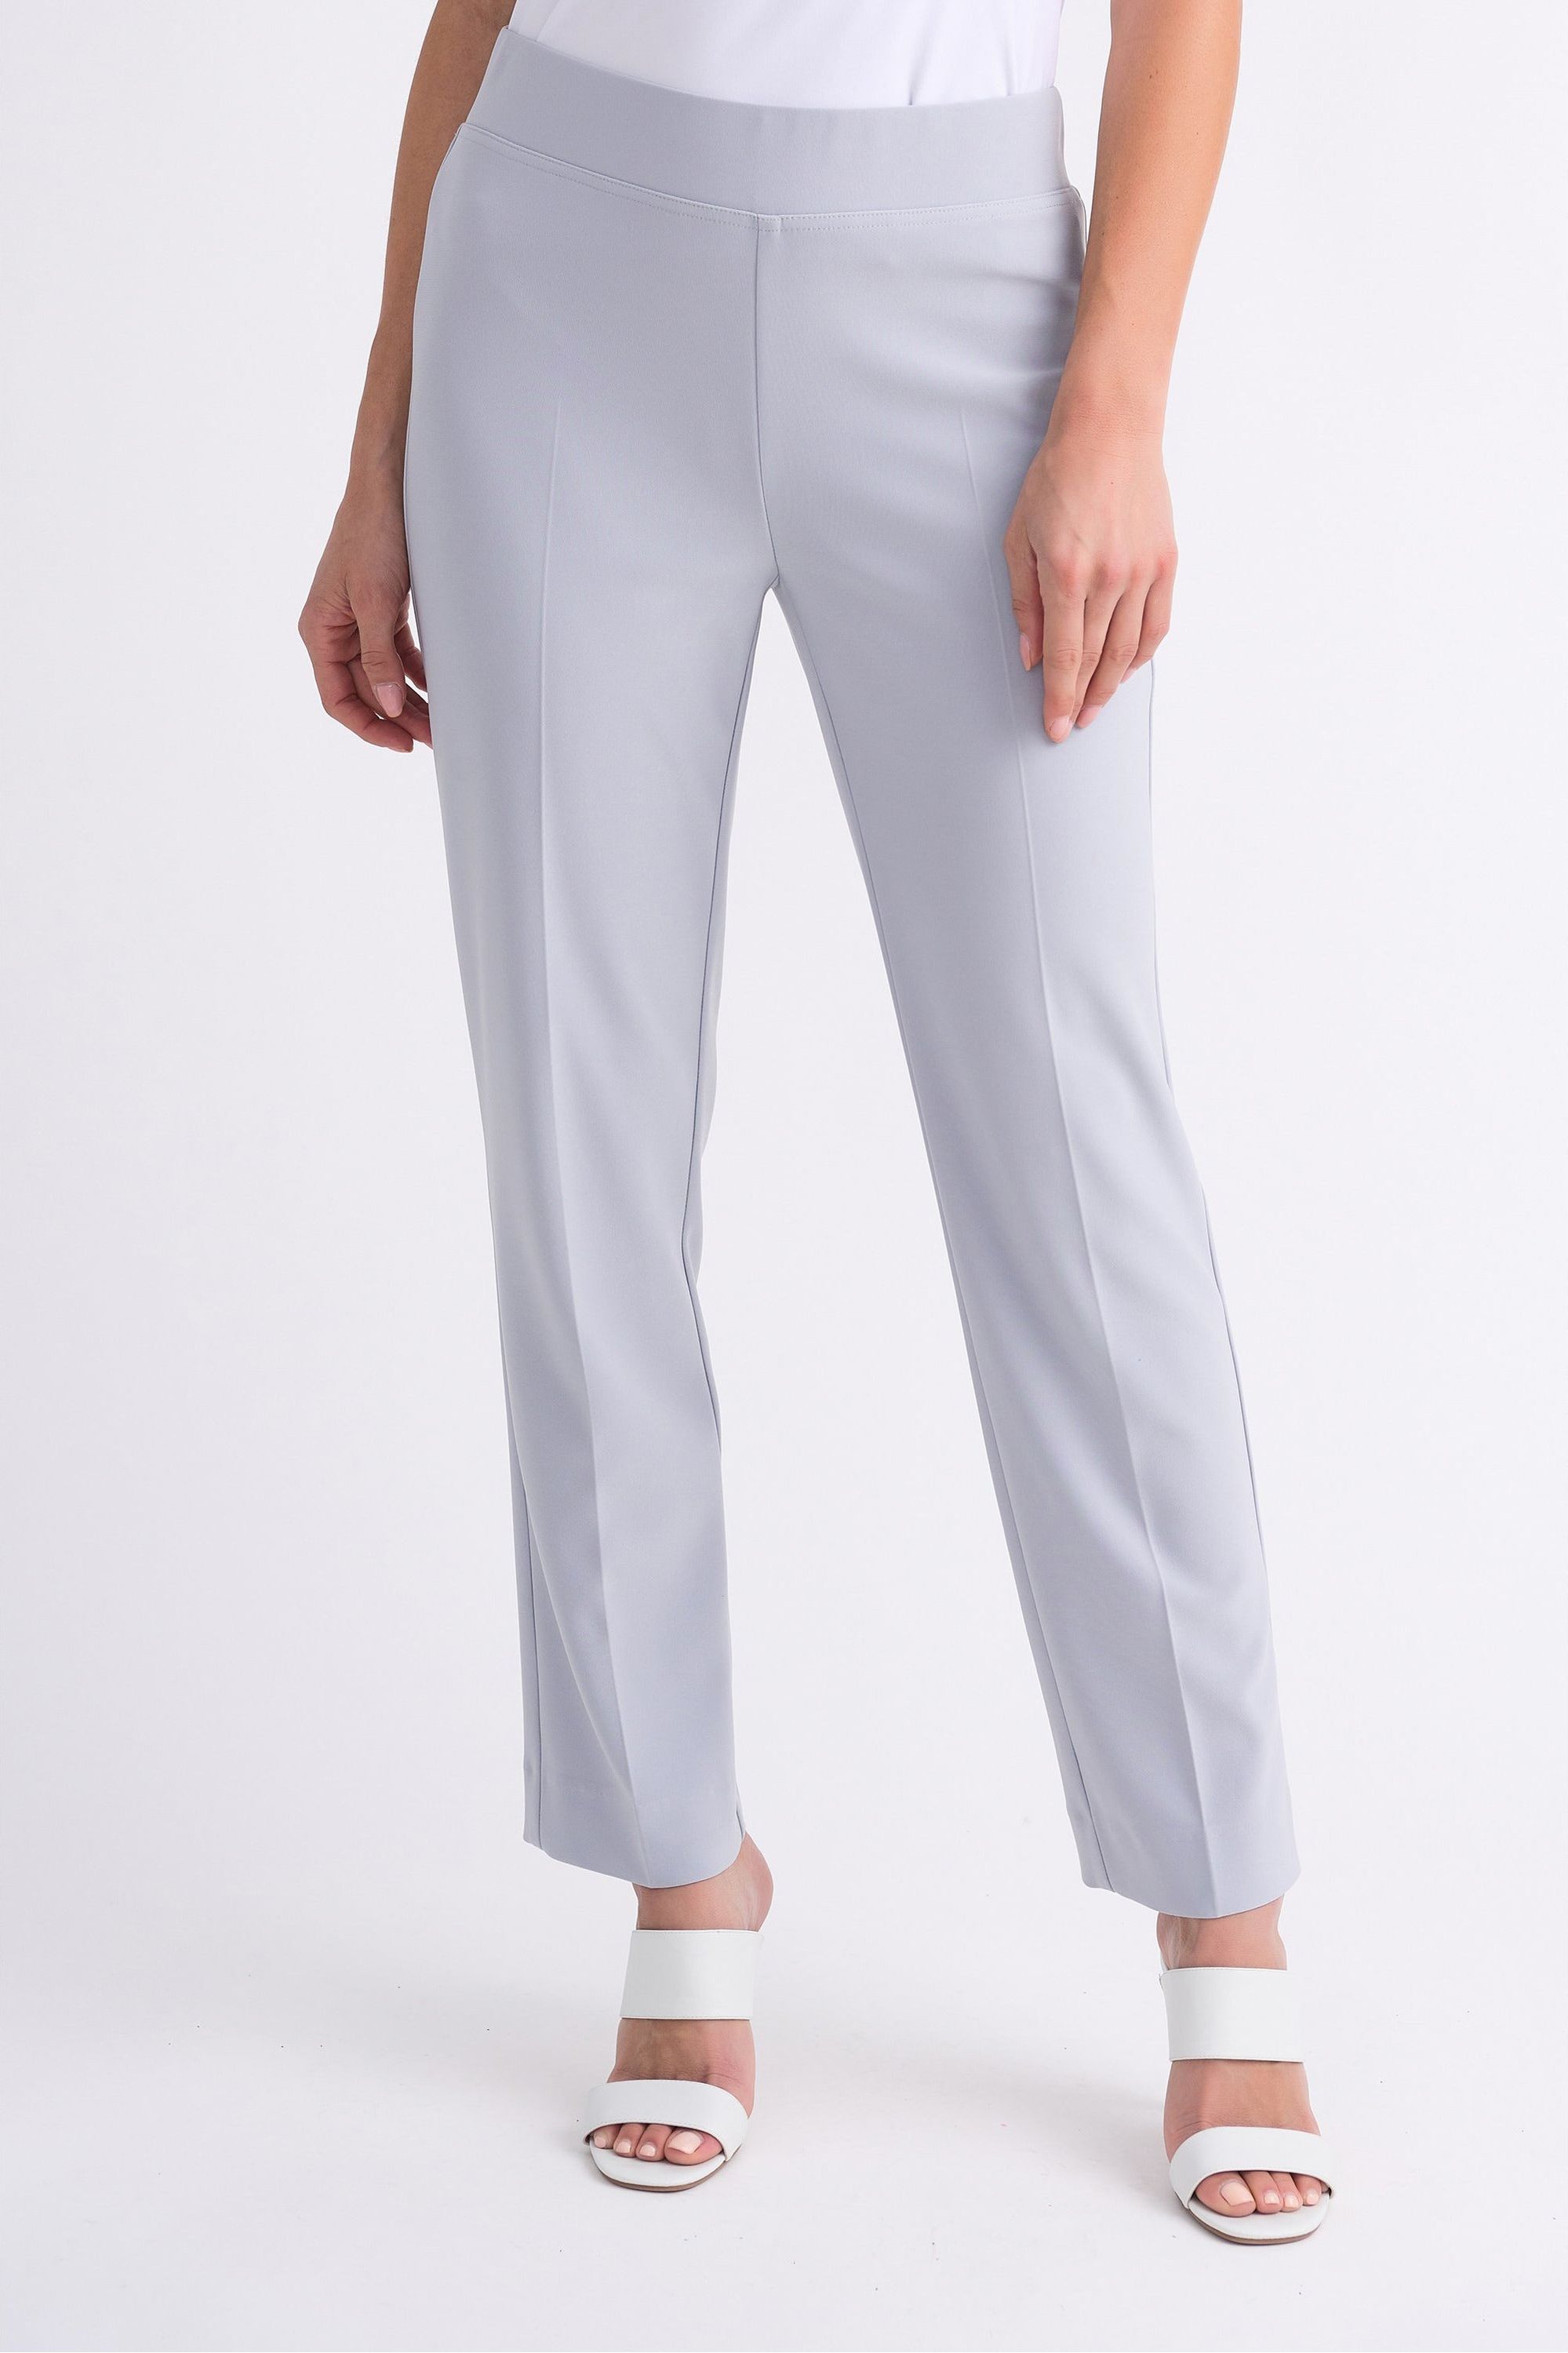 Joseph Ribkoff Pant - Style 143105, grey frost, front